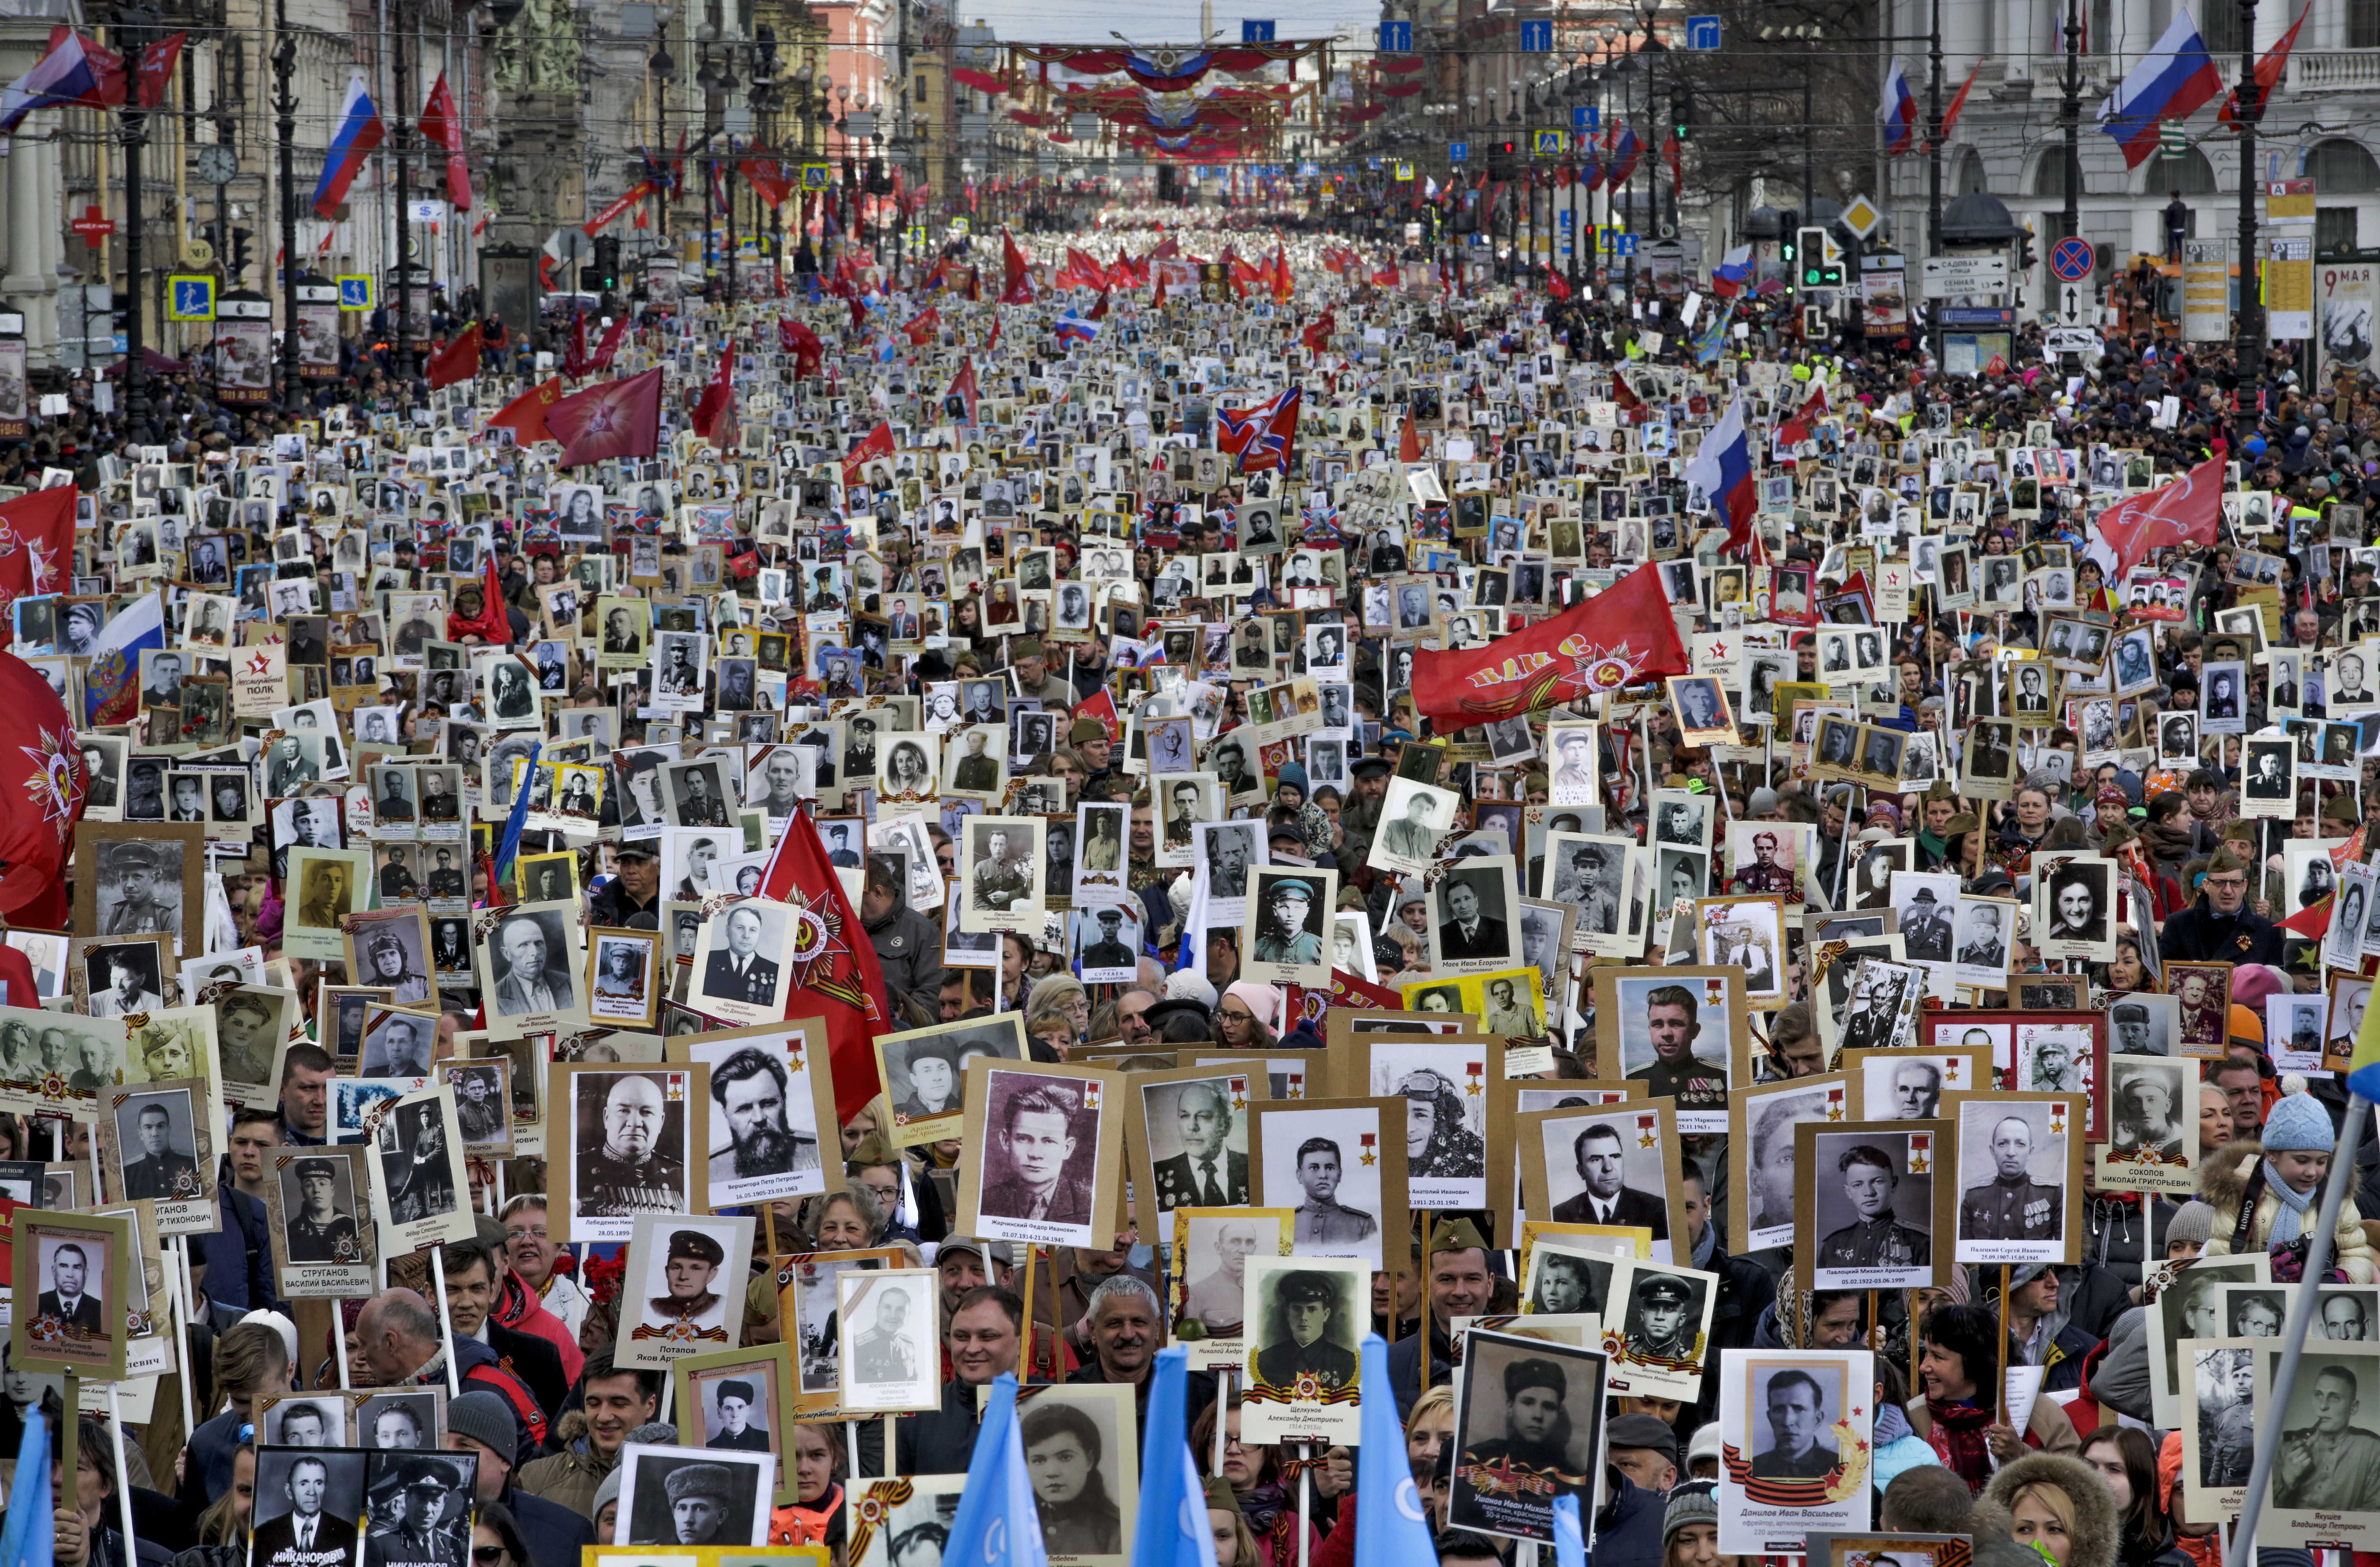 Local residents carry portraits of their ancestors, participants in World War II as they celebrate the 72nd anniversary of the defeat of the Nazis in World War II in St. Petersburg, Russia, on Tuesday, May 9, 2017. About 400,000 people walked in central streets of St. Petersburg in a march named 'Immortal Regiment' while carrying portraits of their relatives who fought in World War II. (AP Photo/Dmitri Lovetsky)